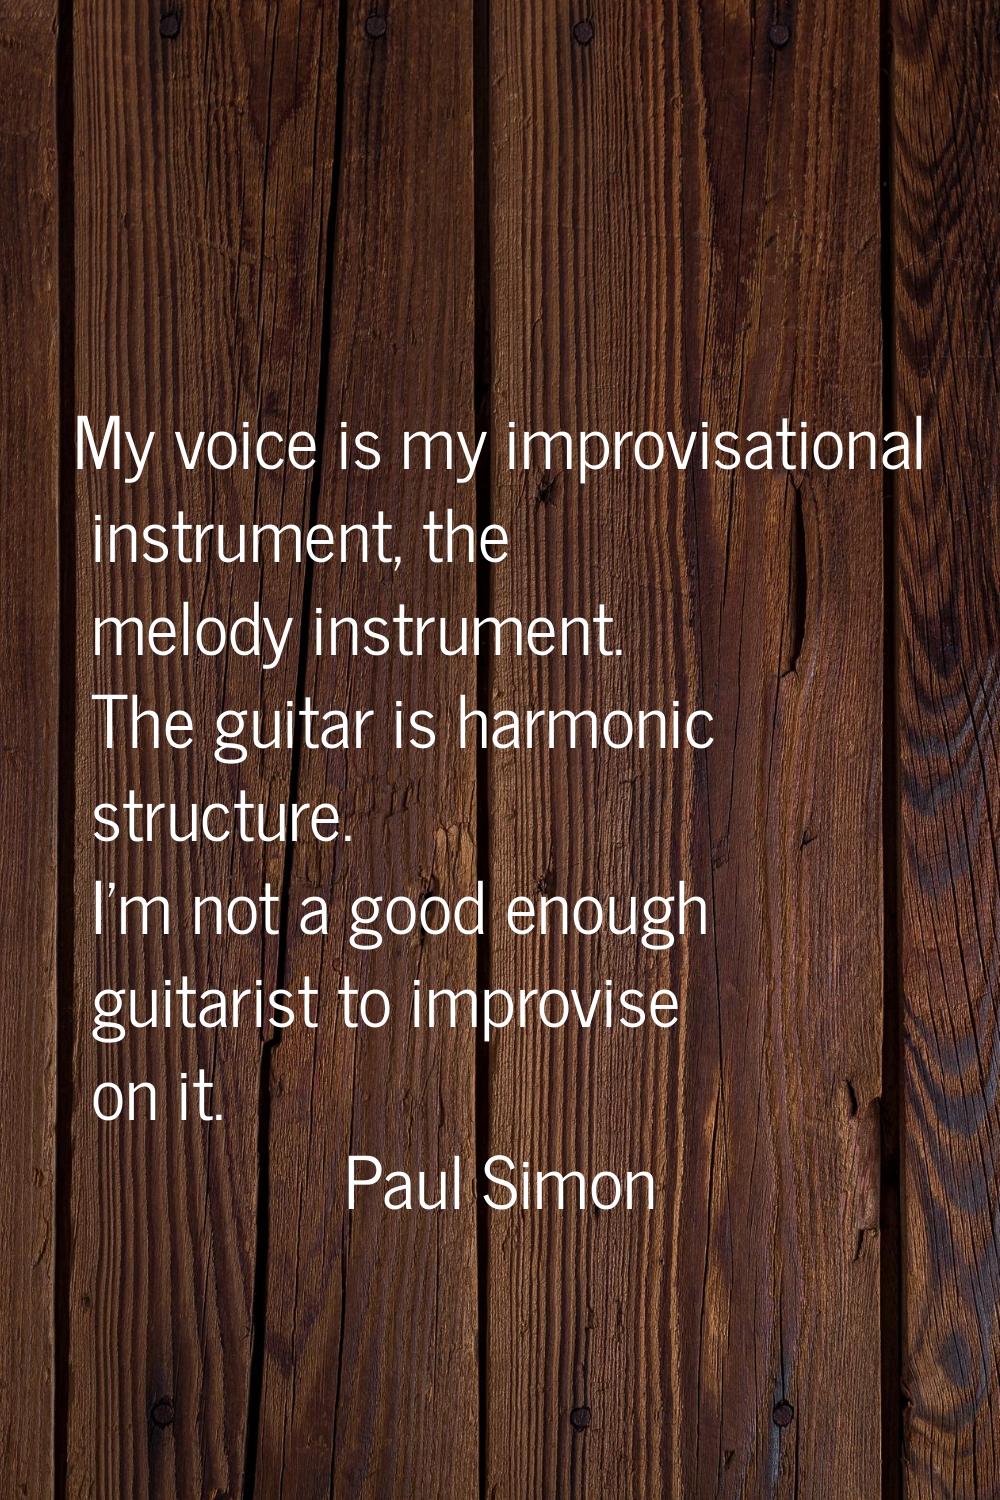 My voice is my improvisational instrument, the melody instrument. The guitar is harmonic structure.